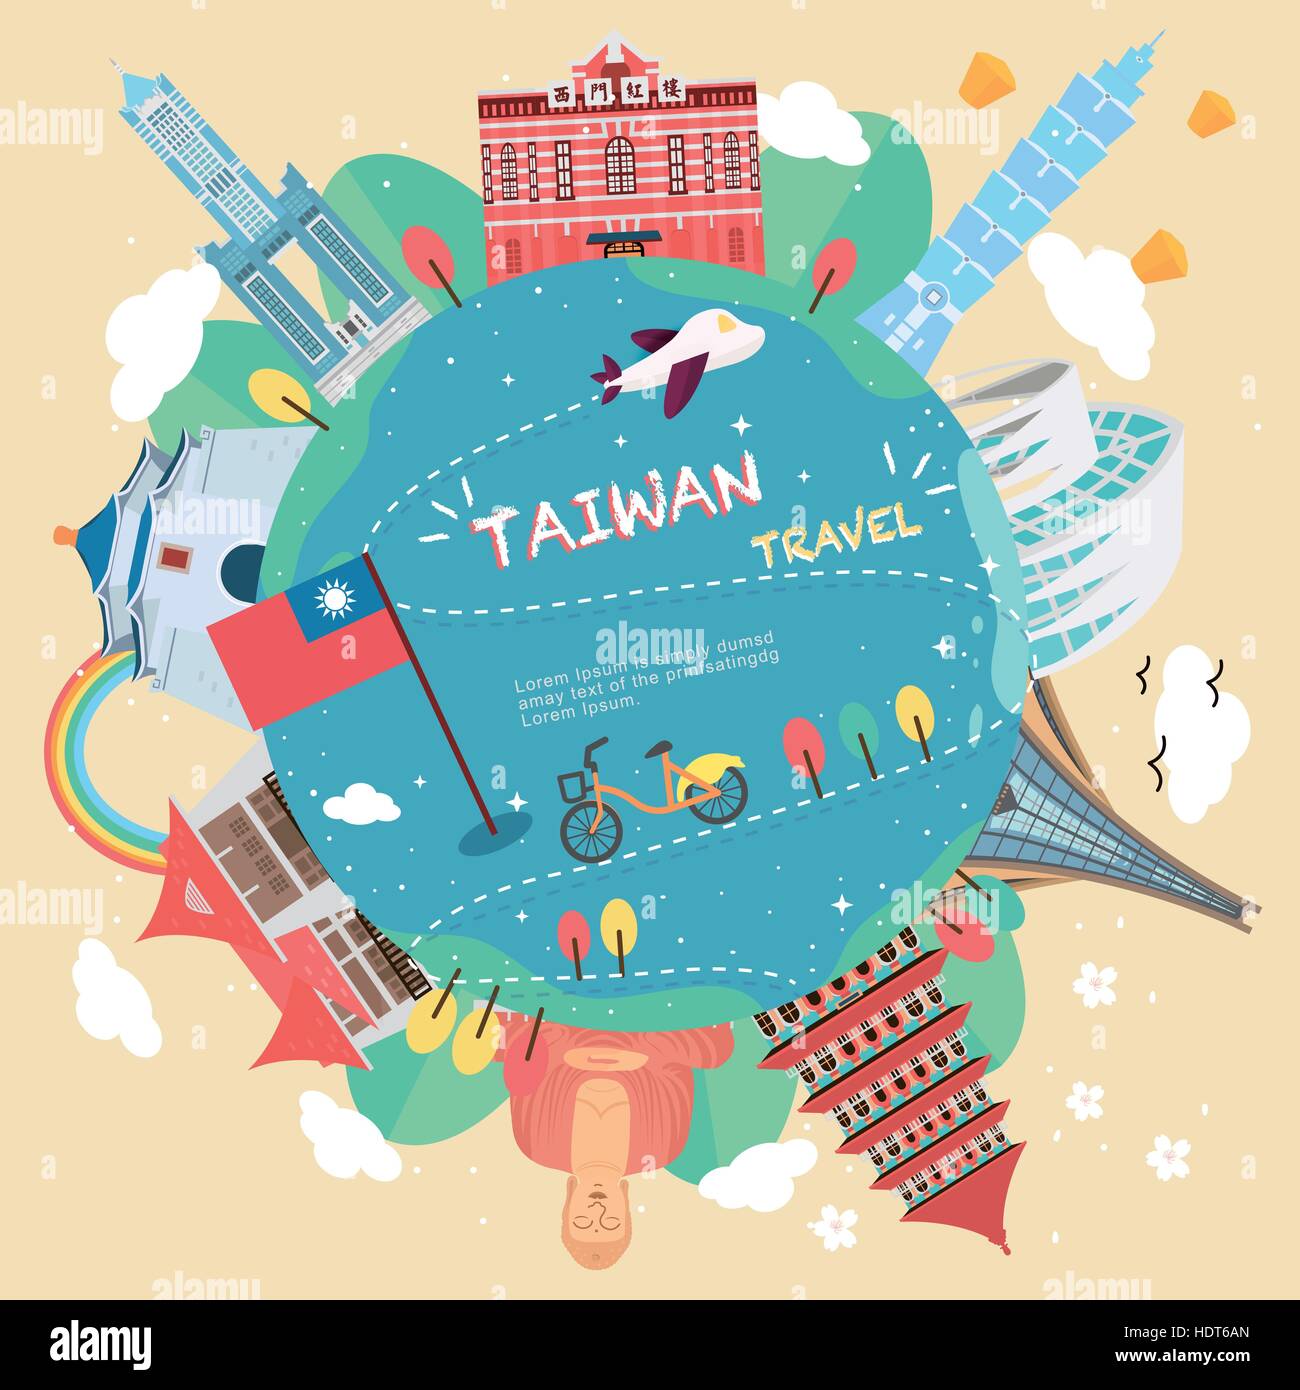 lovely Taiwan travel poster design in flat style Stock Vector